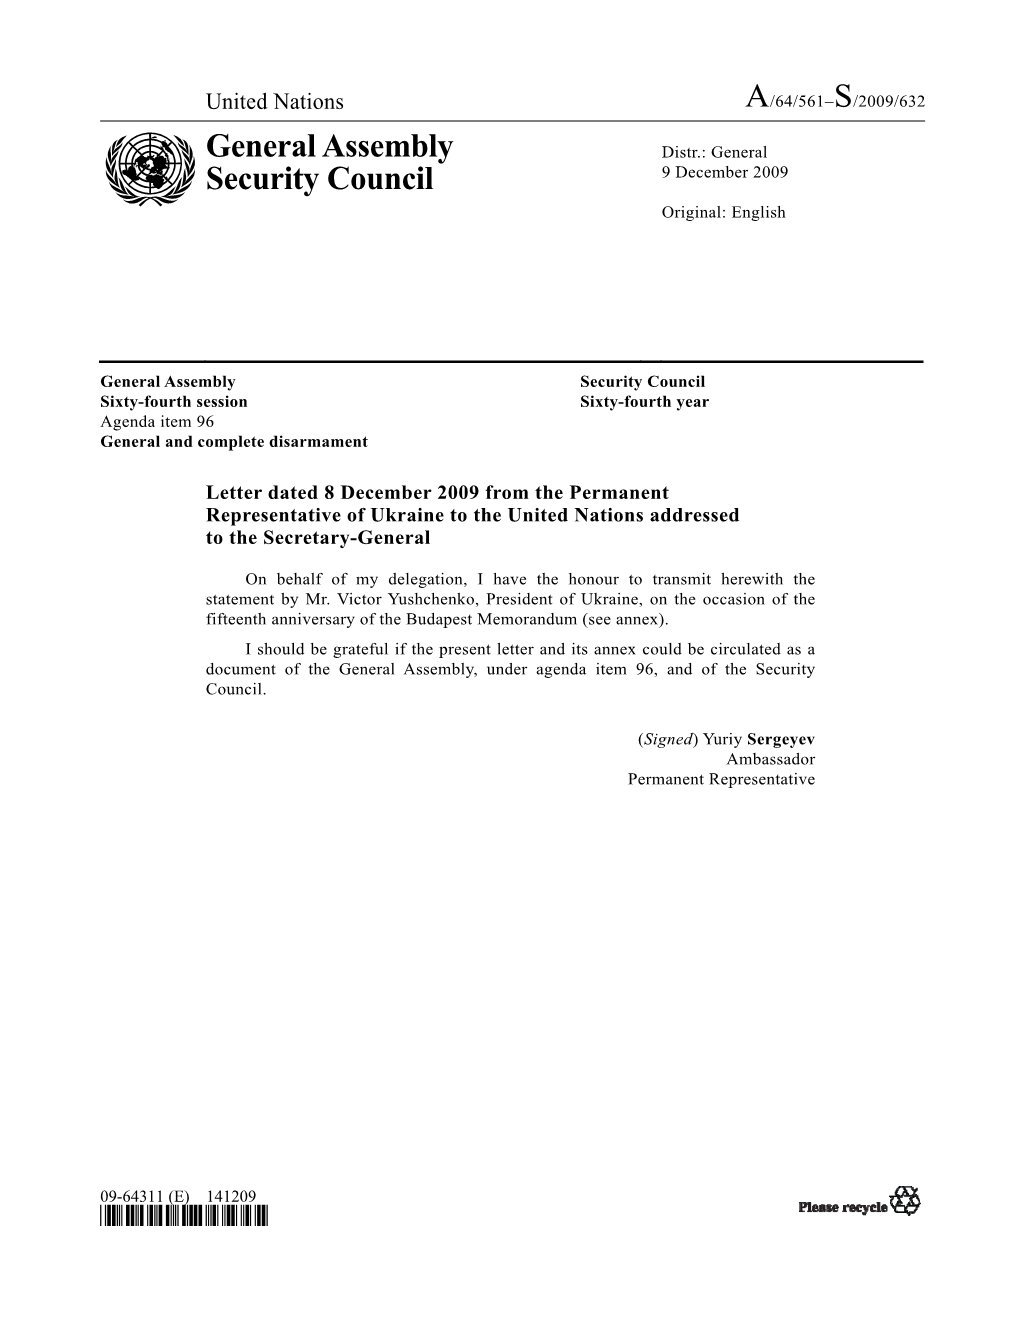 A/64/561–S/2009/632 General Assembly Security Council